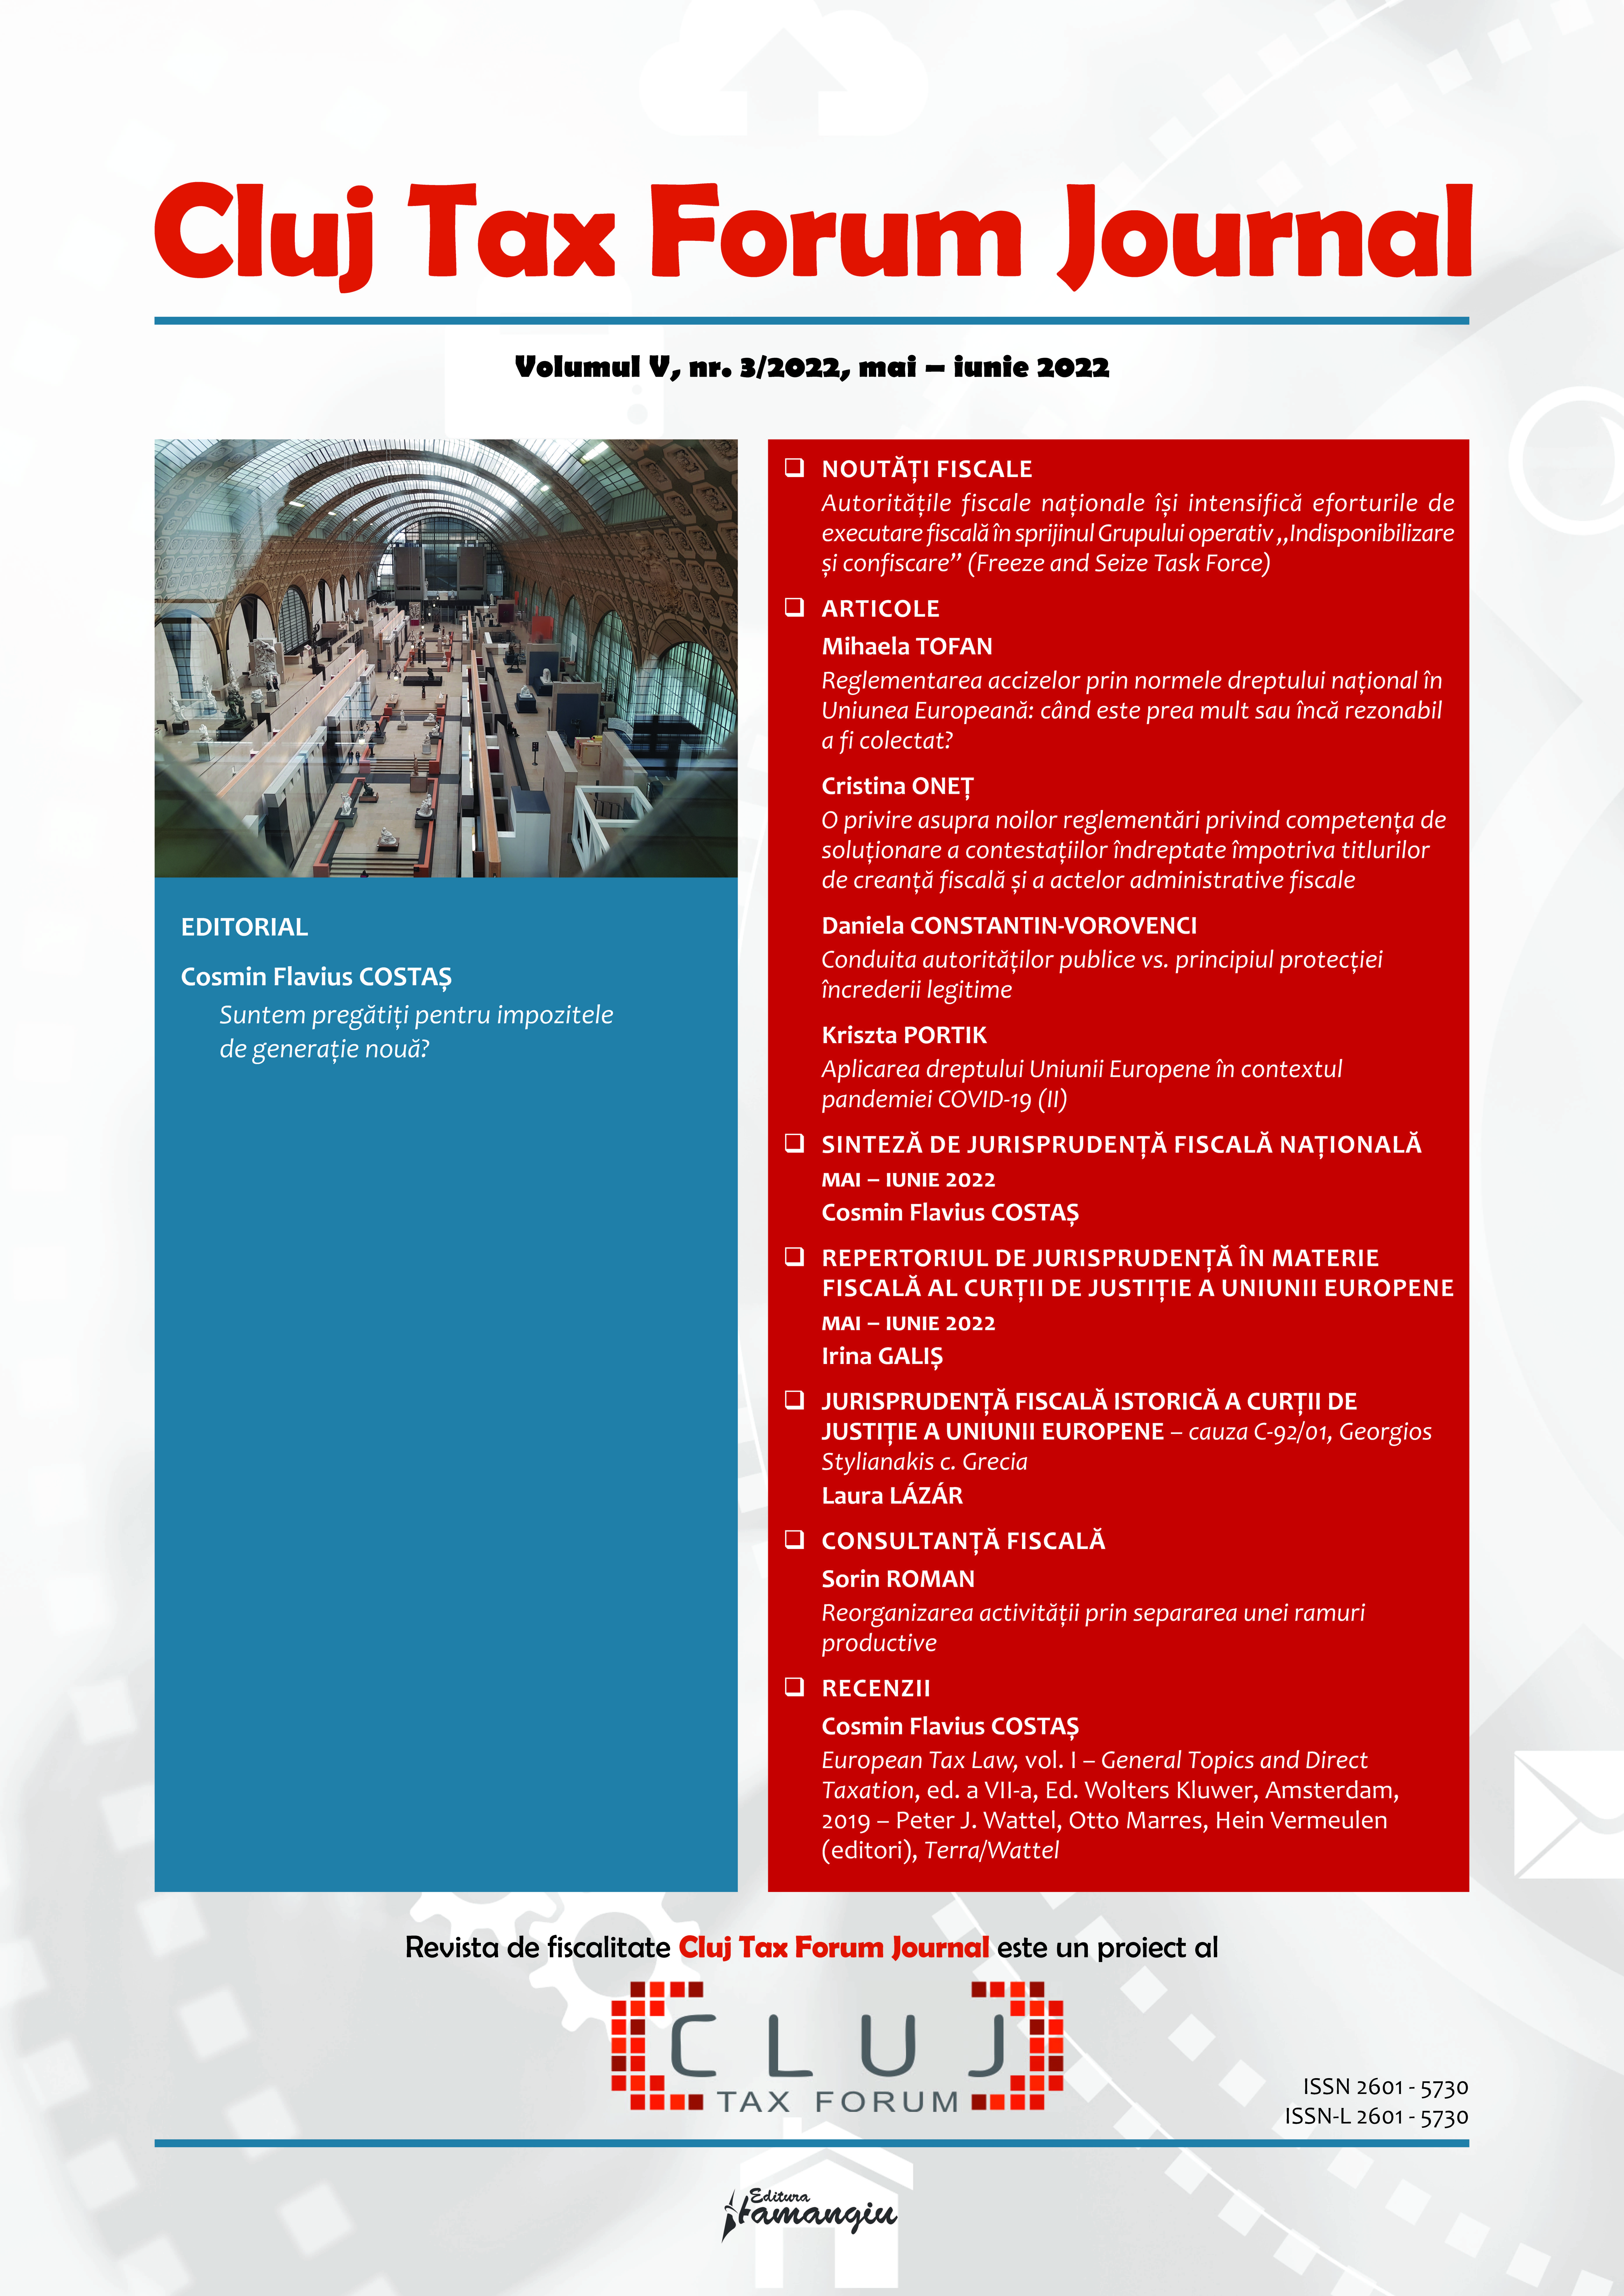 Application of the European Union Law in the Context of the COVID-19 Pandemic (II) Cover Image